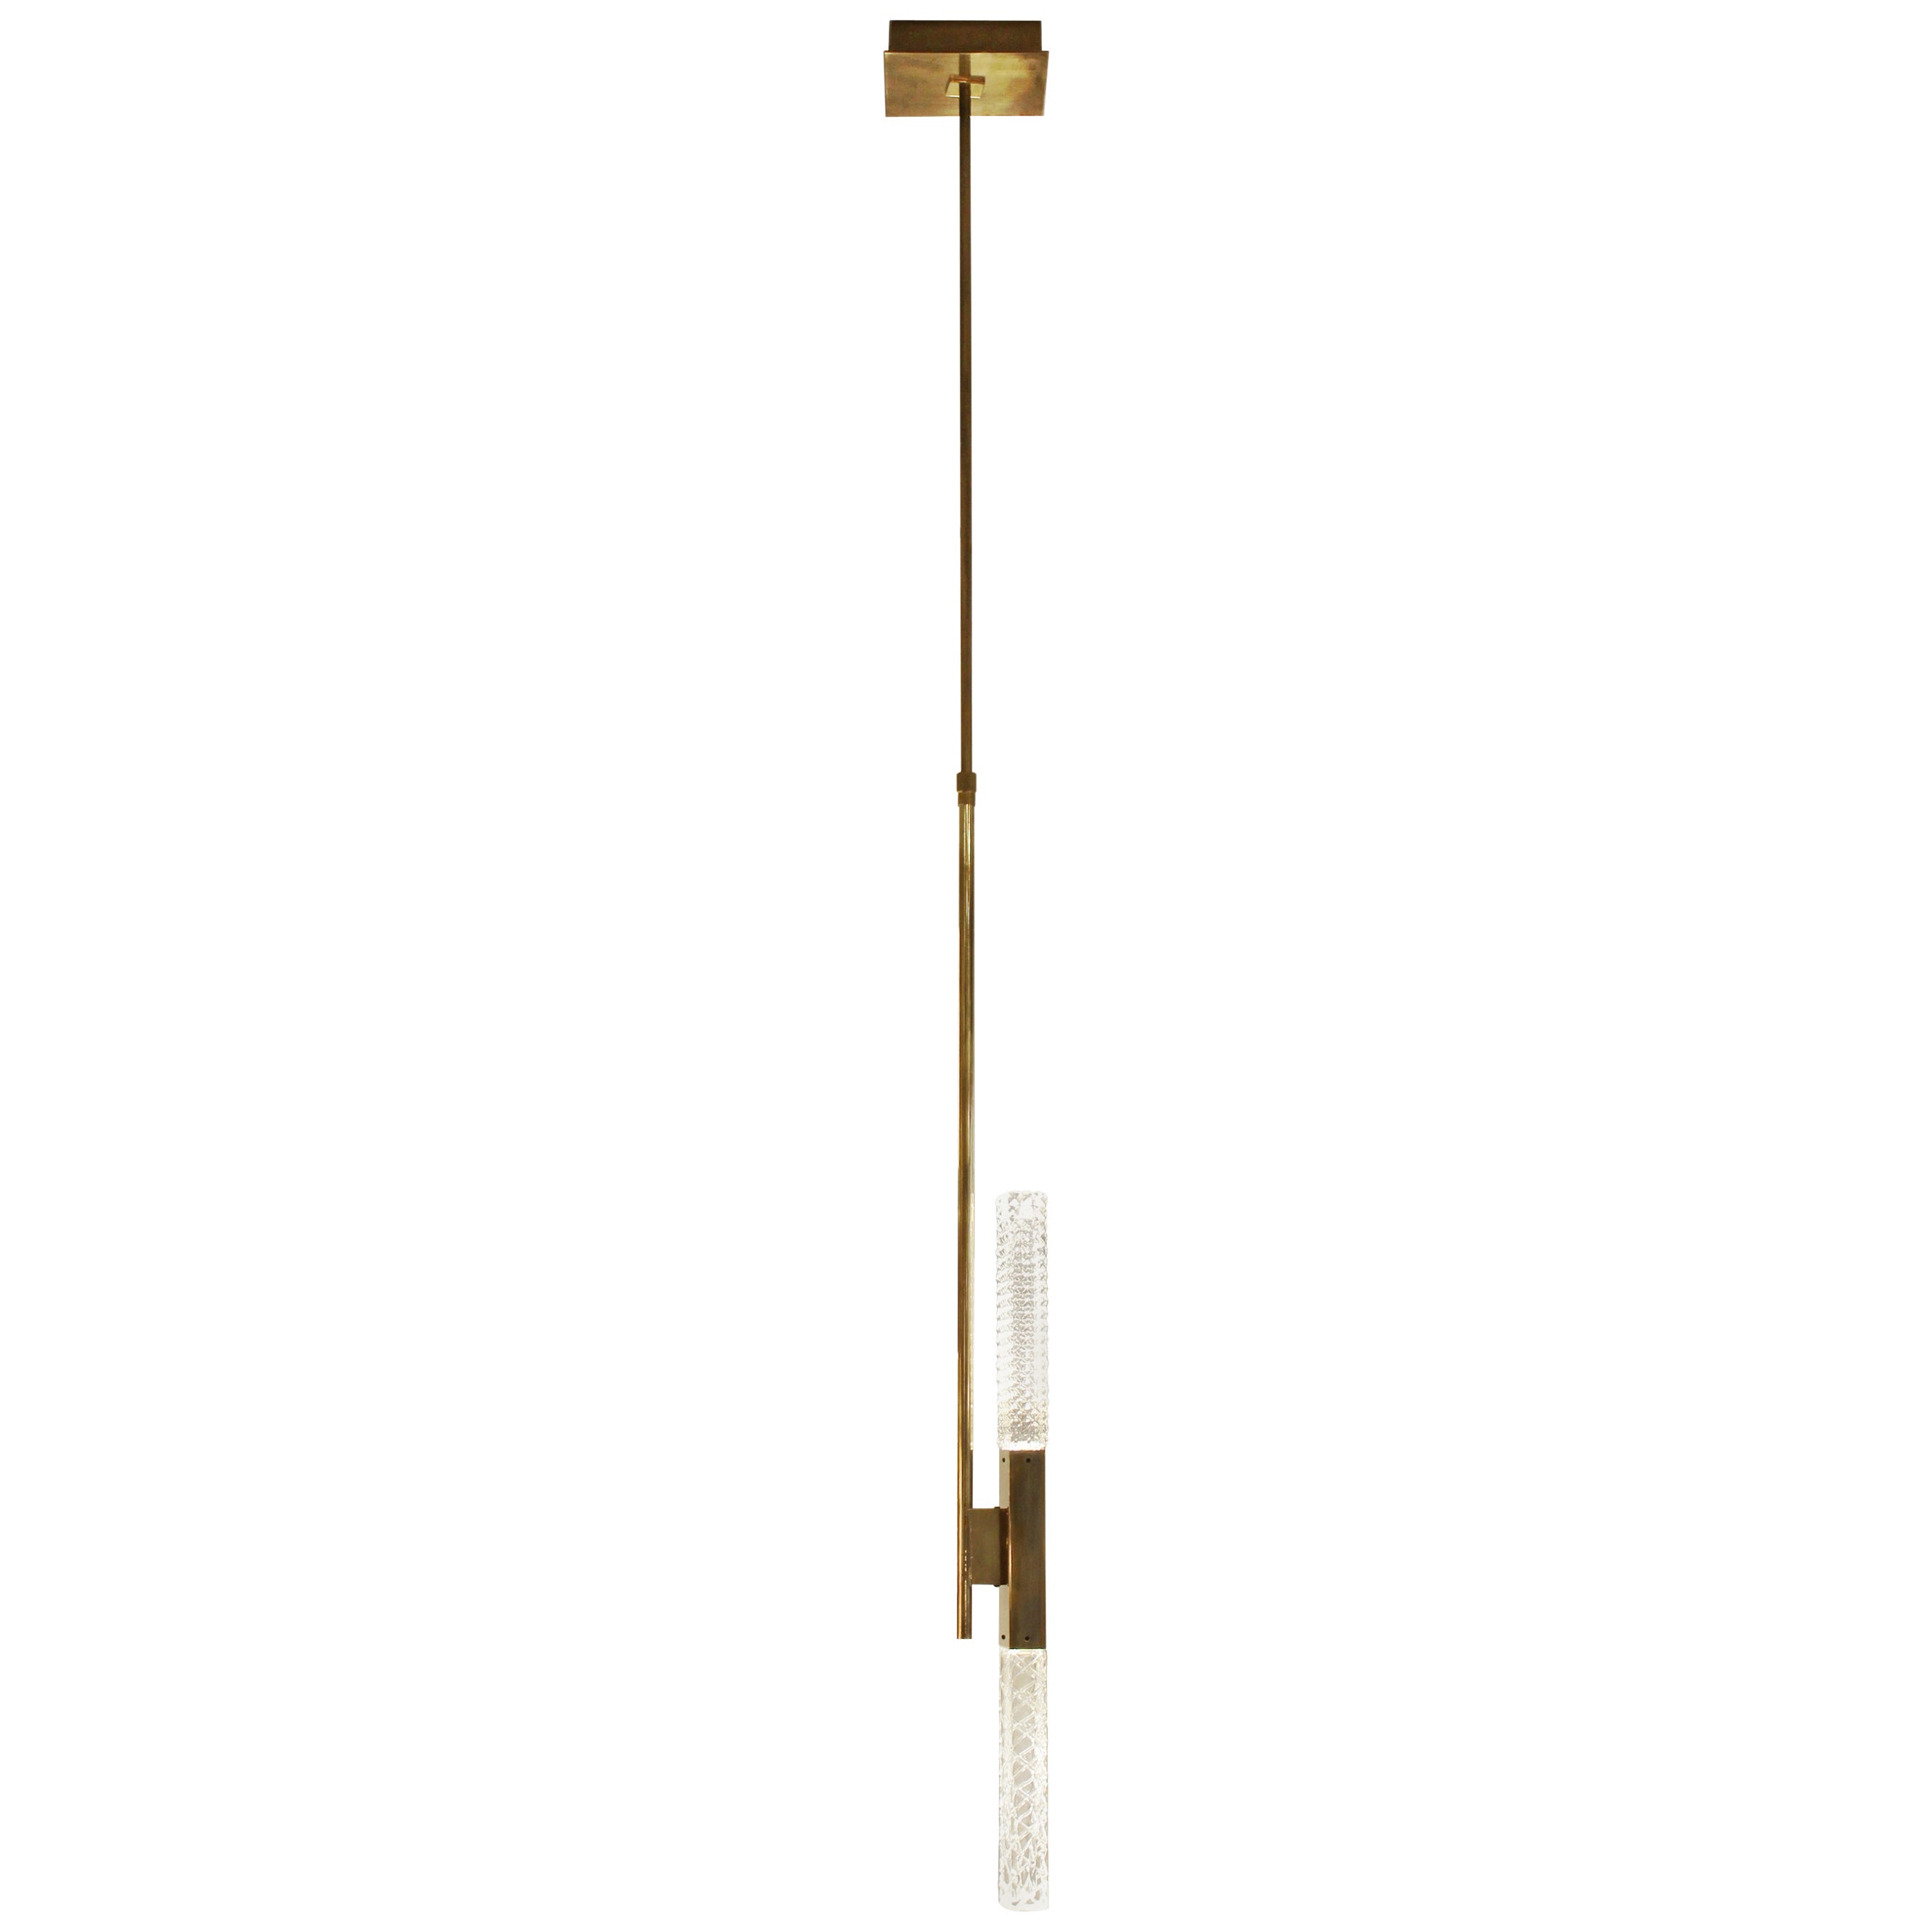 Mikado Solo Suspension Lamp in Satin Brass with Crystal Diffusers